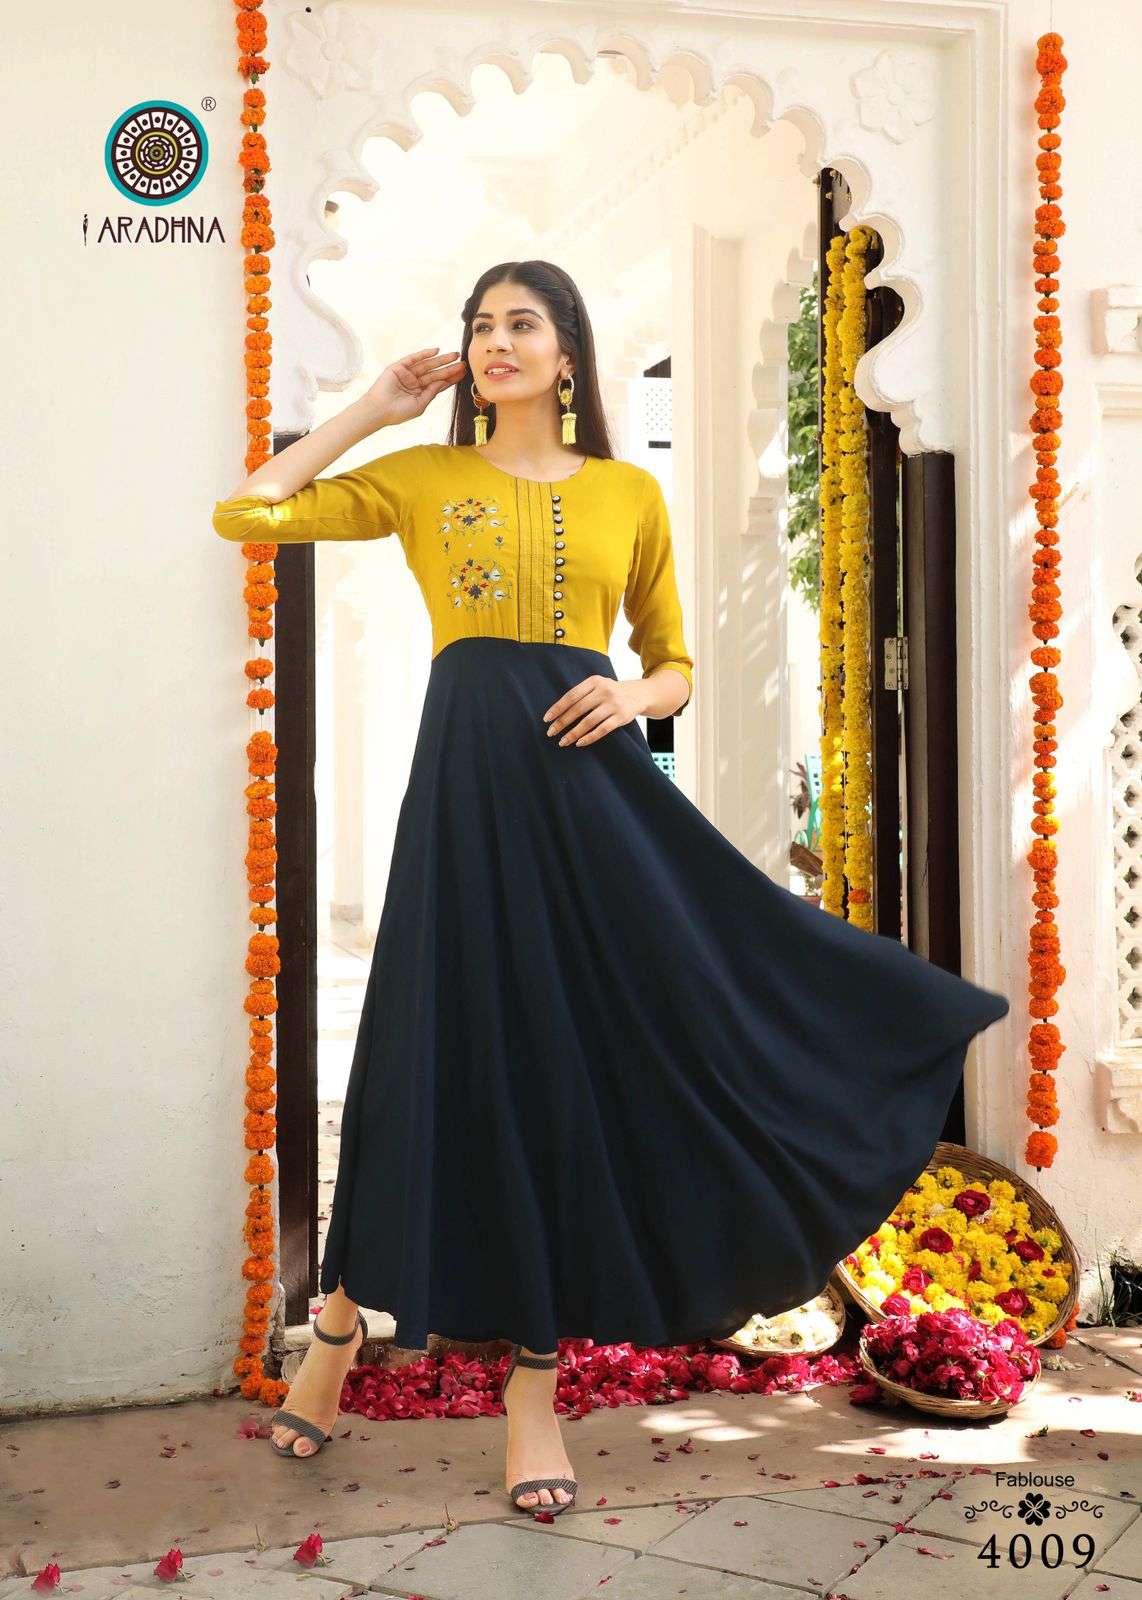 ARADHNA FASHION PRESENTS FABULOUS VOL 4 HEAVY RAYON EMBROIDERY WHOLESALE GOWN